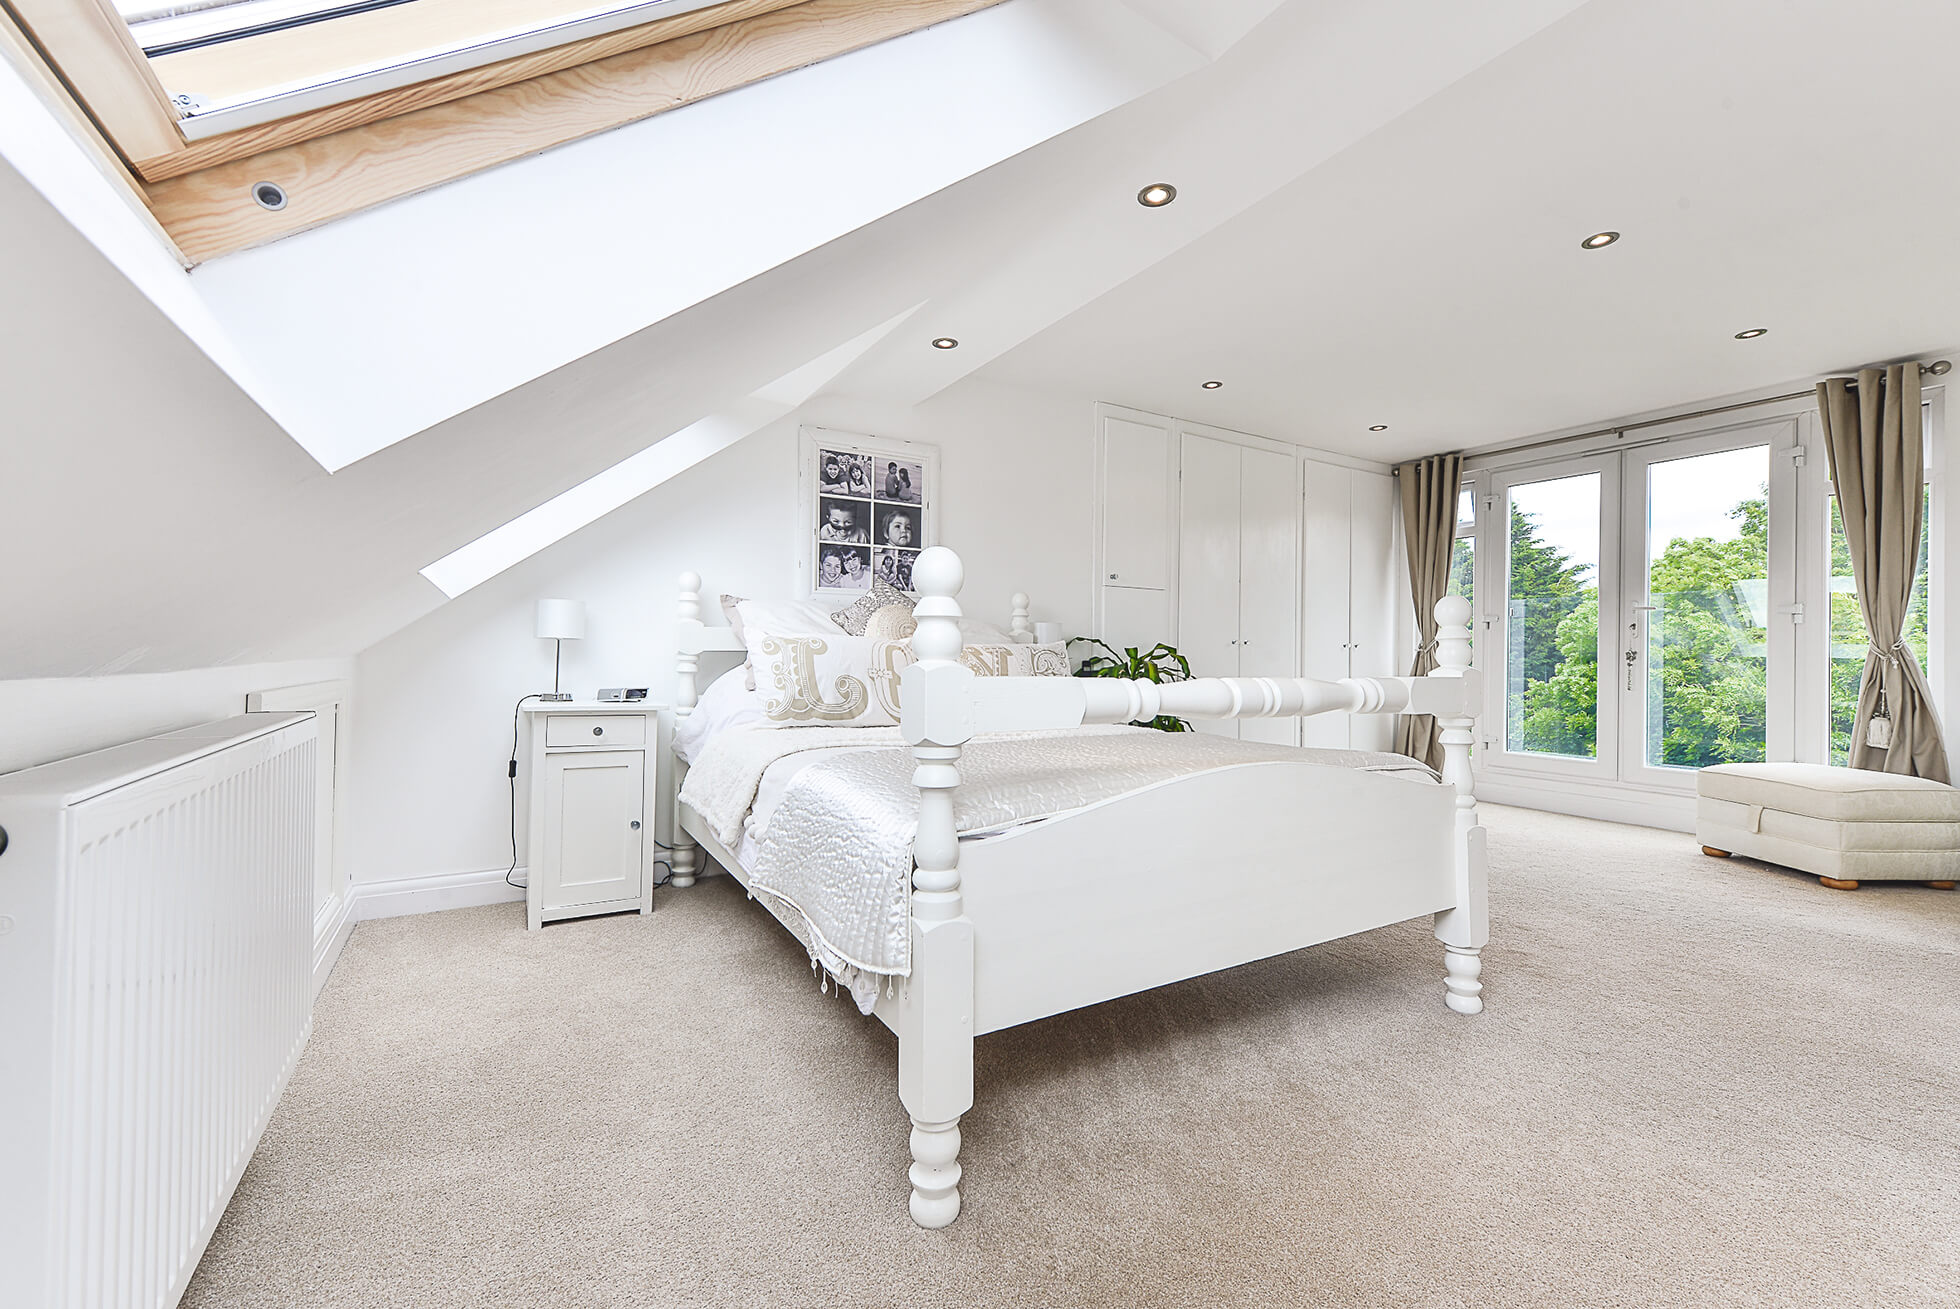 Do you have a question about converting your Loft in Stanstead Abbotts? Here are the most popular questions asked by our clients.